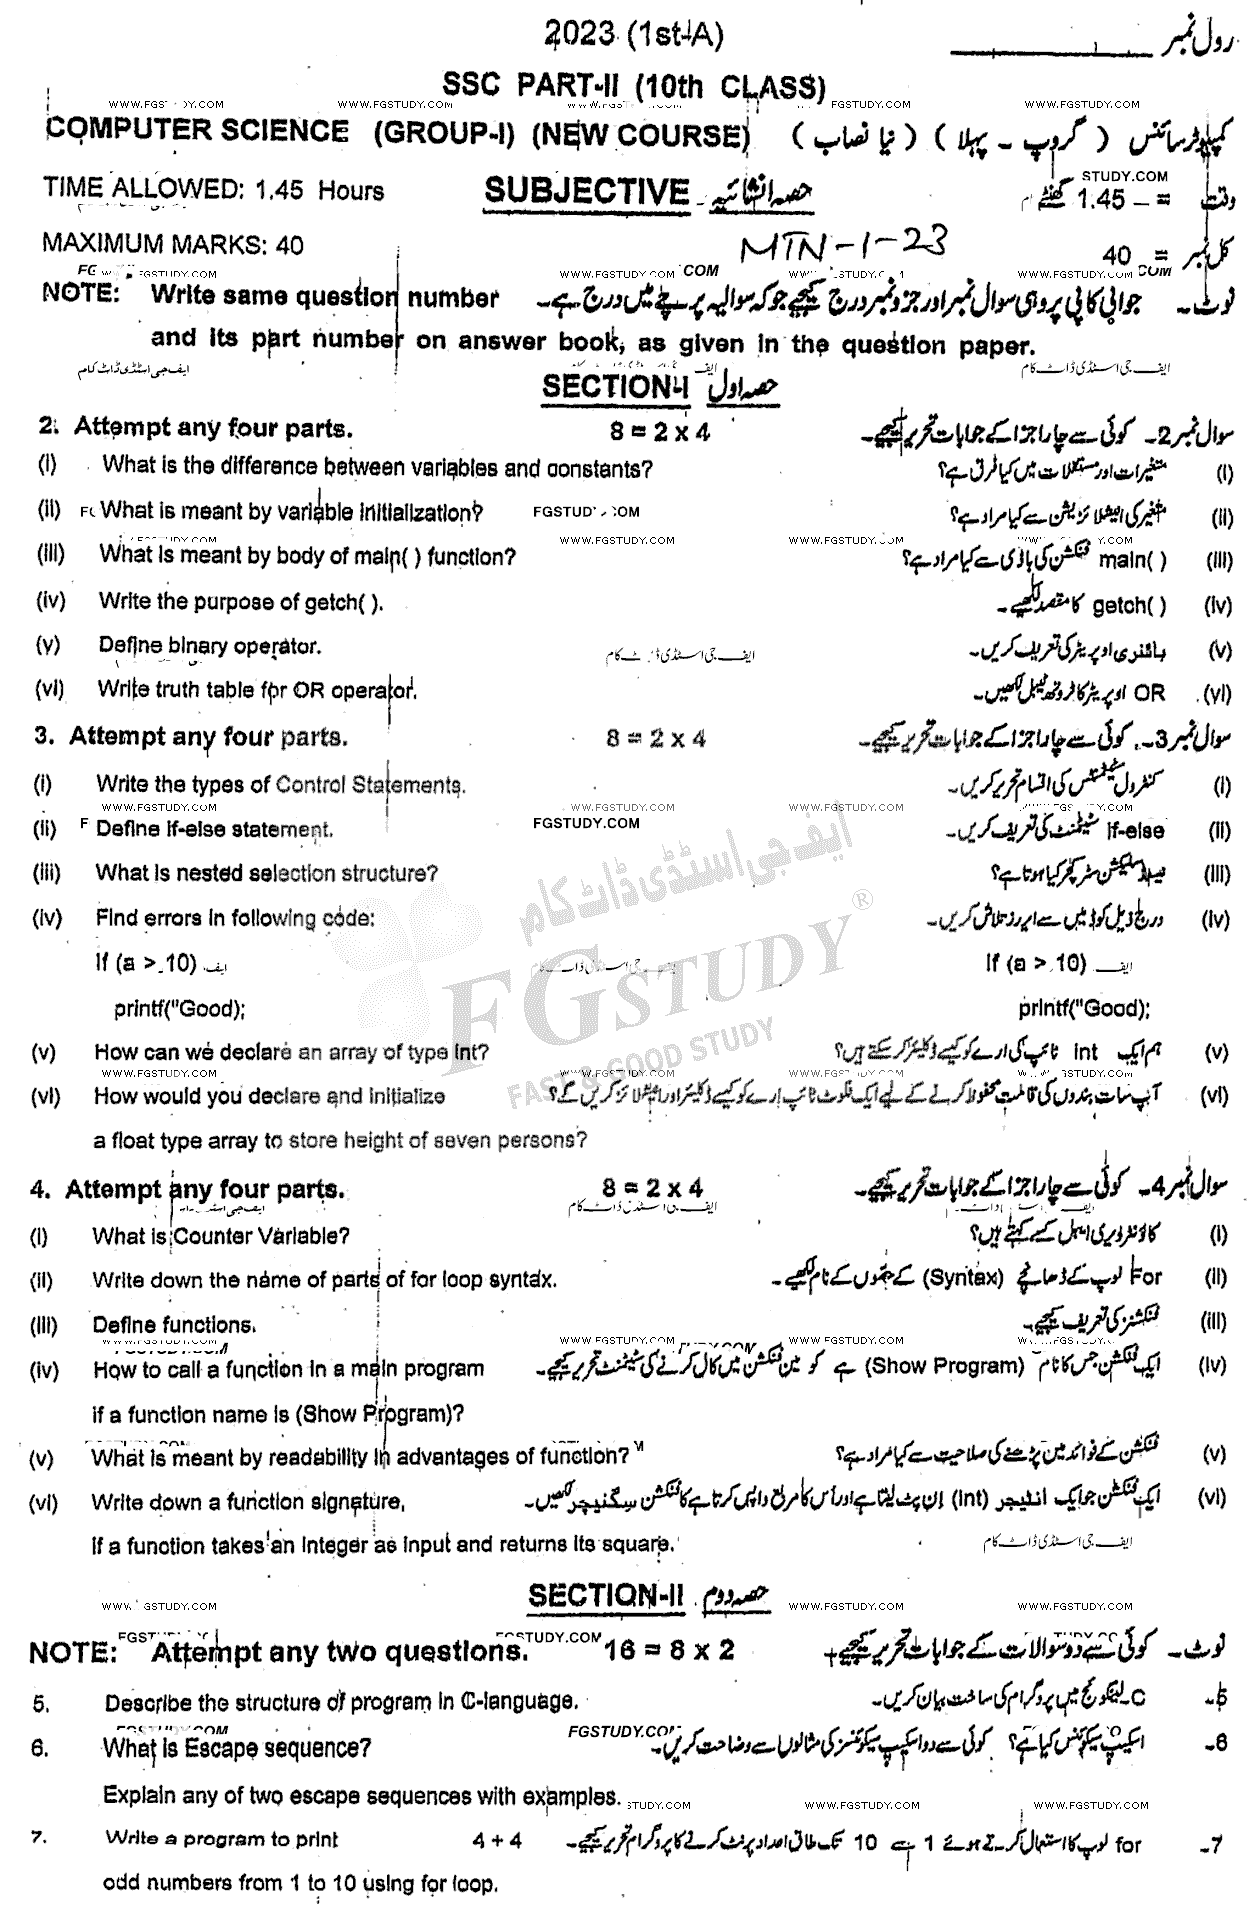 10th Class Computer Science Past Paper 2023 Multan Board Group 1 Subjective